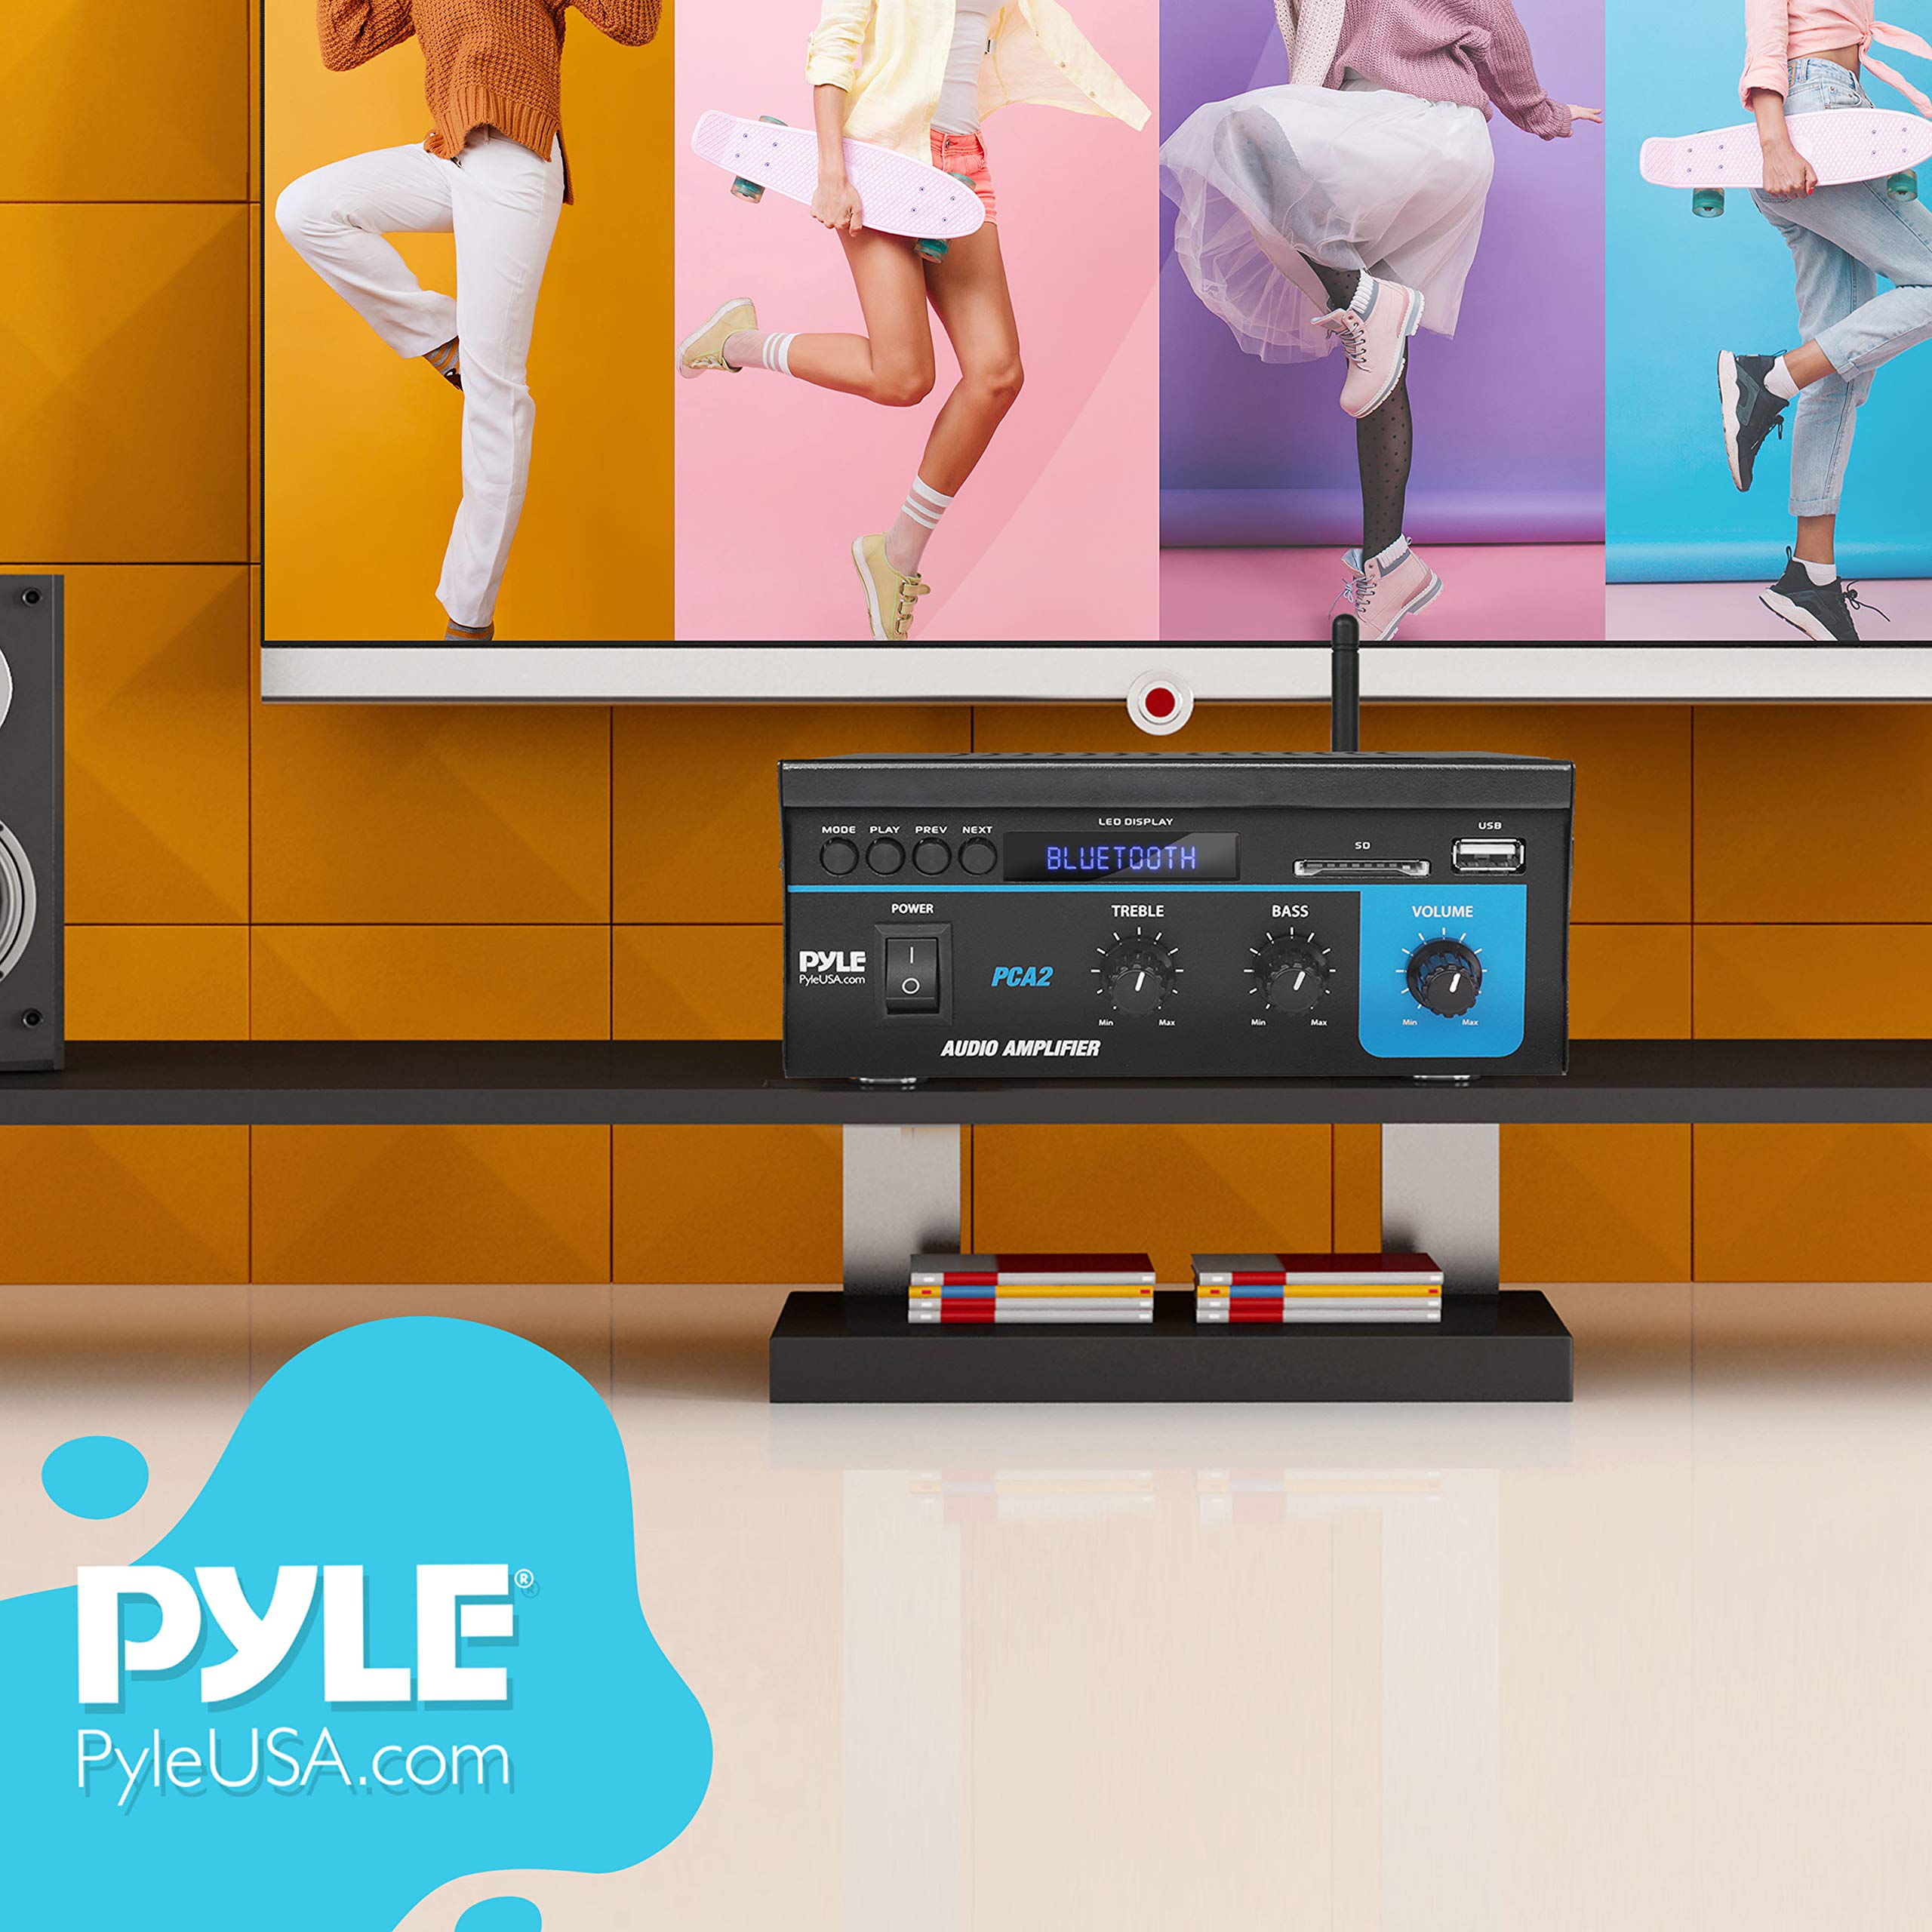 Pyle Home Home Audio Power Amplifier System 2X40W Mini Dual Channel Sound Stereo Receiver Box w/ LED For Amplified Speakers, CD Player, Theater via 3.5mm RCA for Studio, Home Use Pyle PCA2 Black